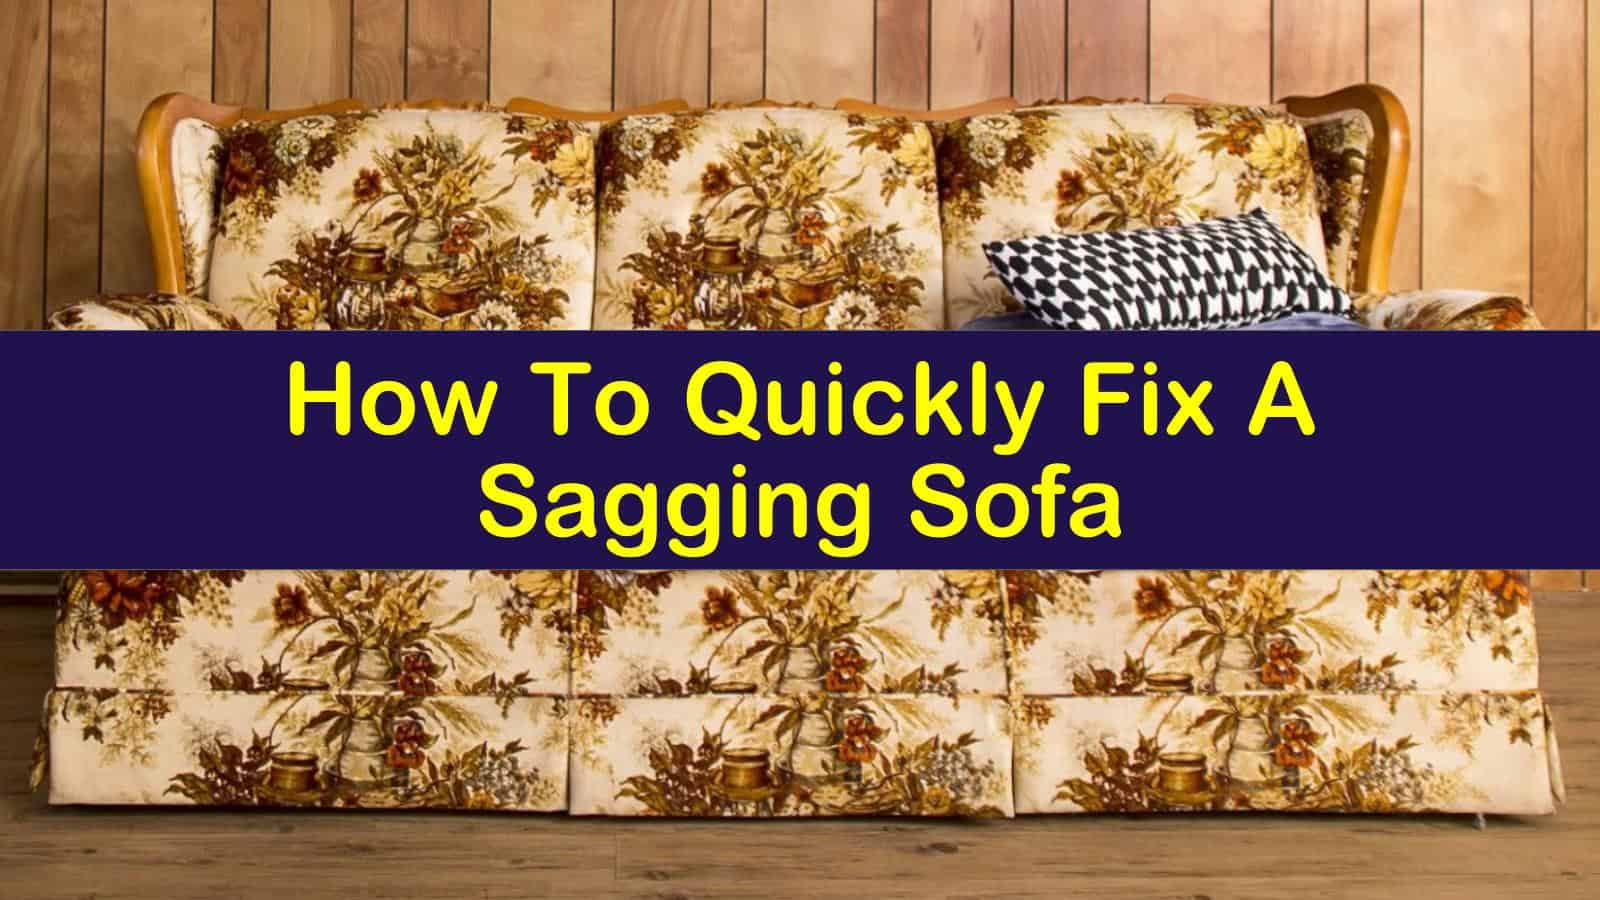 How To Fix A Sagging Couch, How To Repair A Sagging Sofa